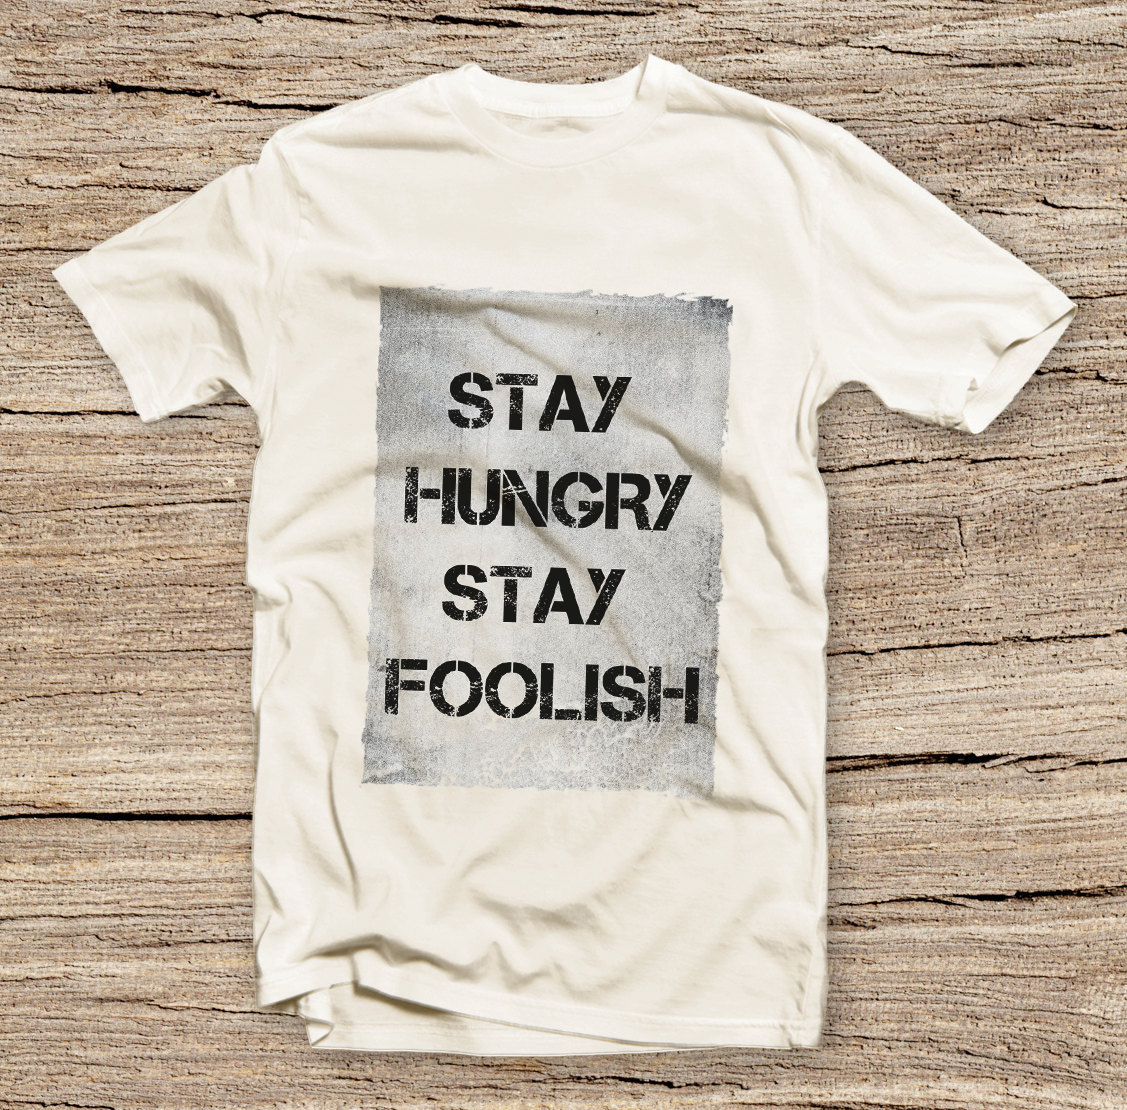 Pts-023 Stay Hungry Stay Foolish, Steve Jobs's Quote, Fashion Style Printed T-shirt